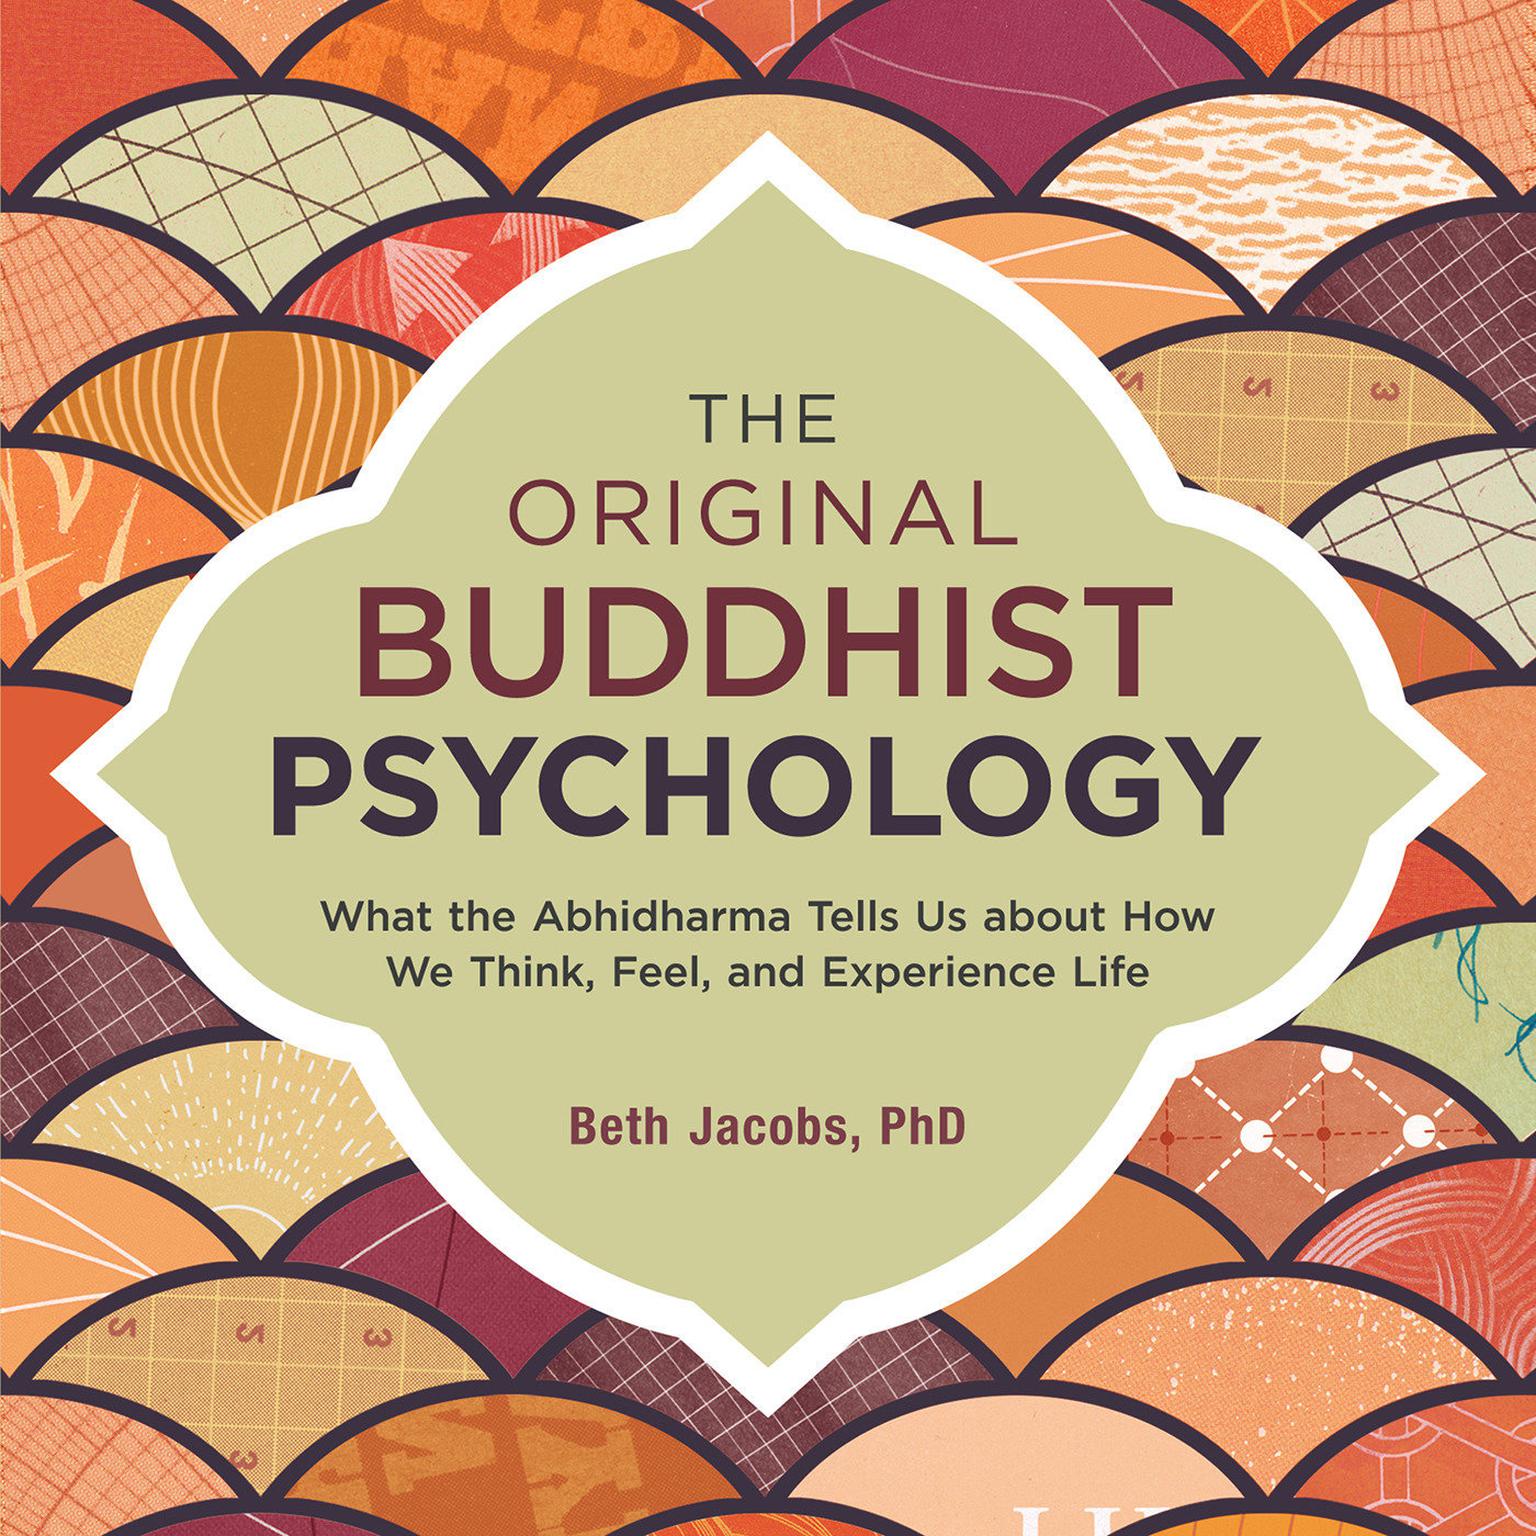 The Original Buddhist Psychology: What the Abhidharma Tells Us About How We Think, Feel, and Experience Life Audiobook, by Beth Jacobs